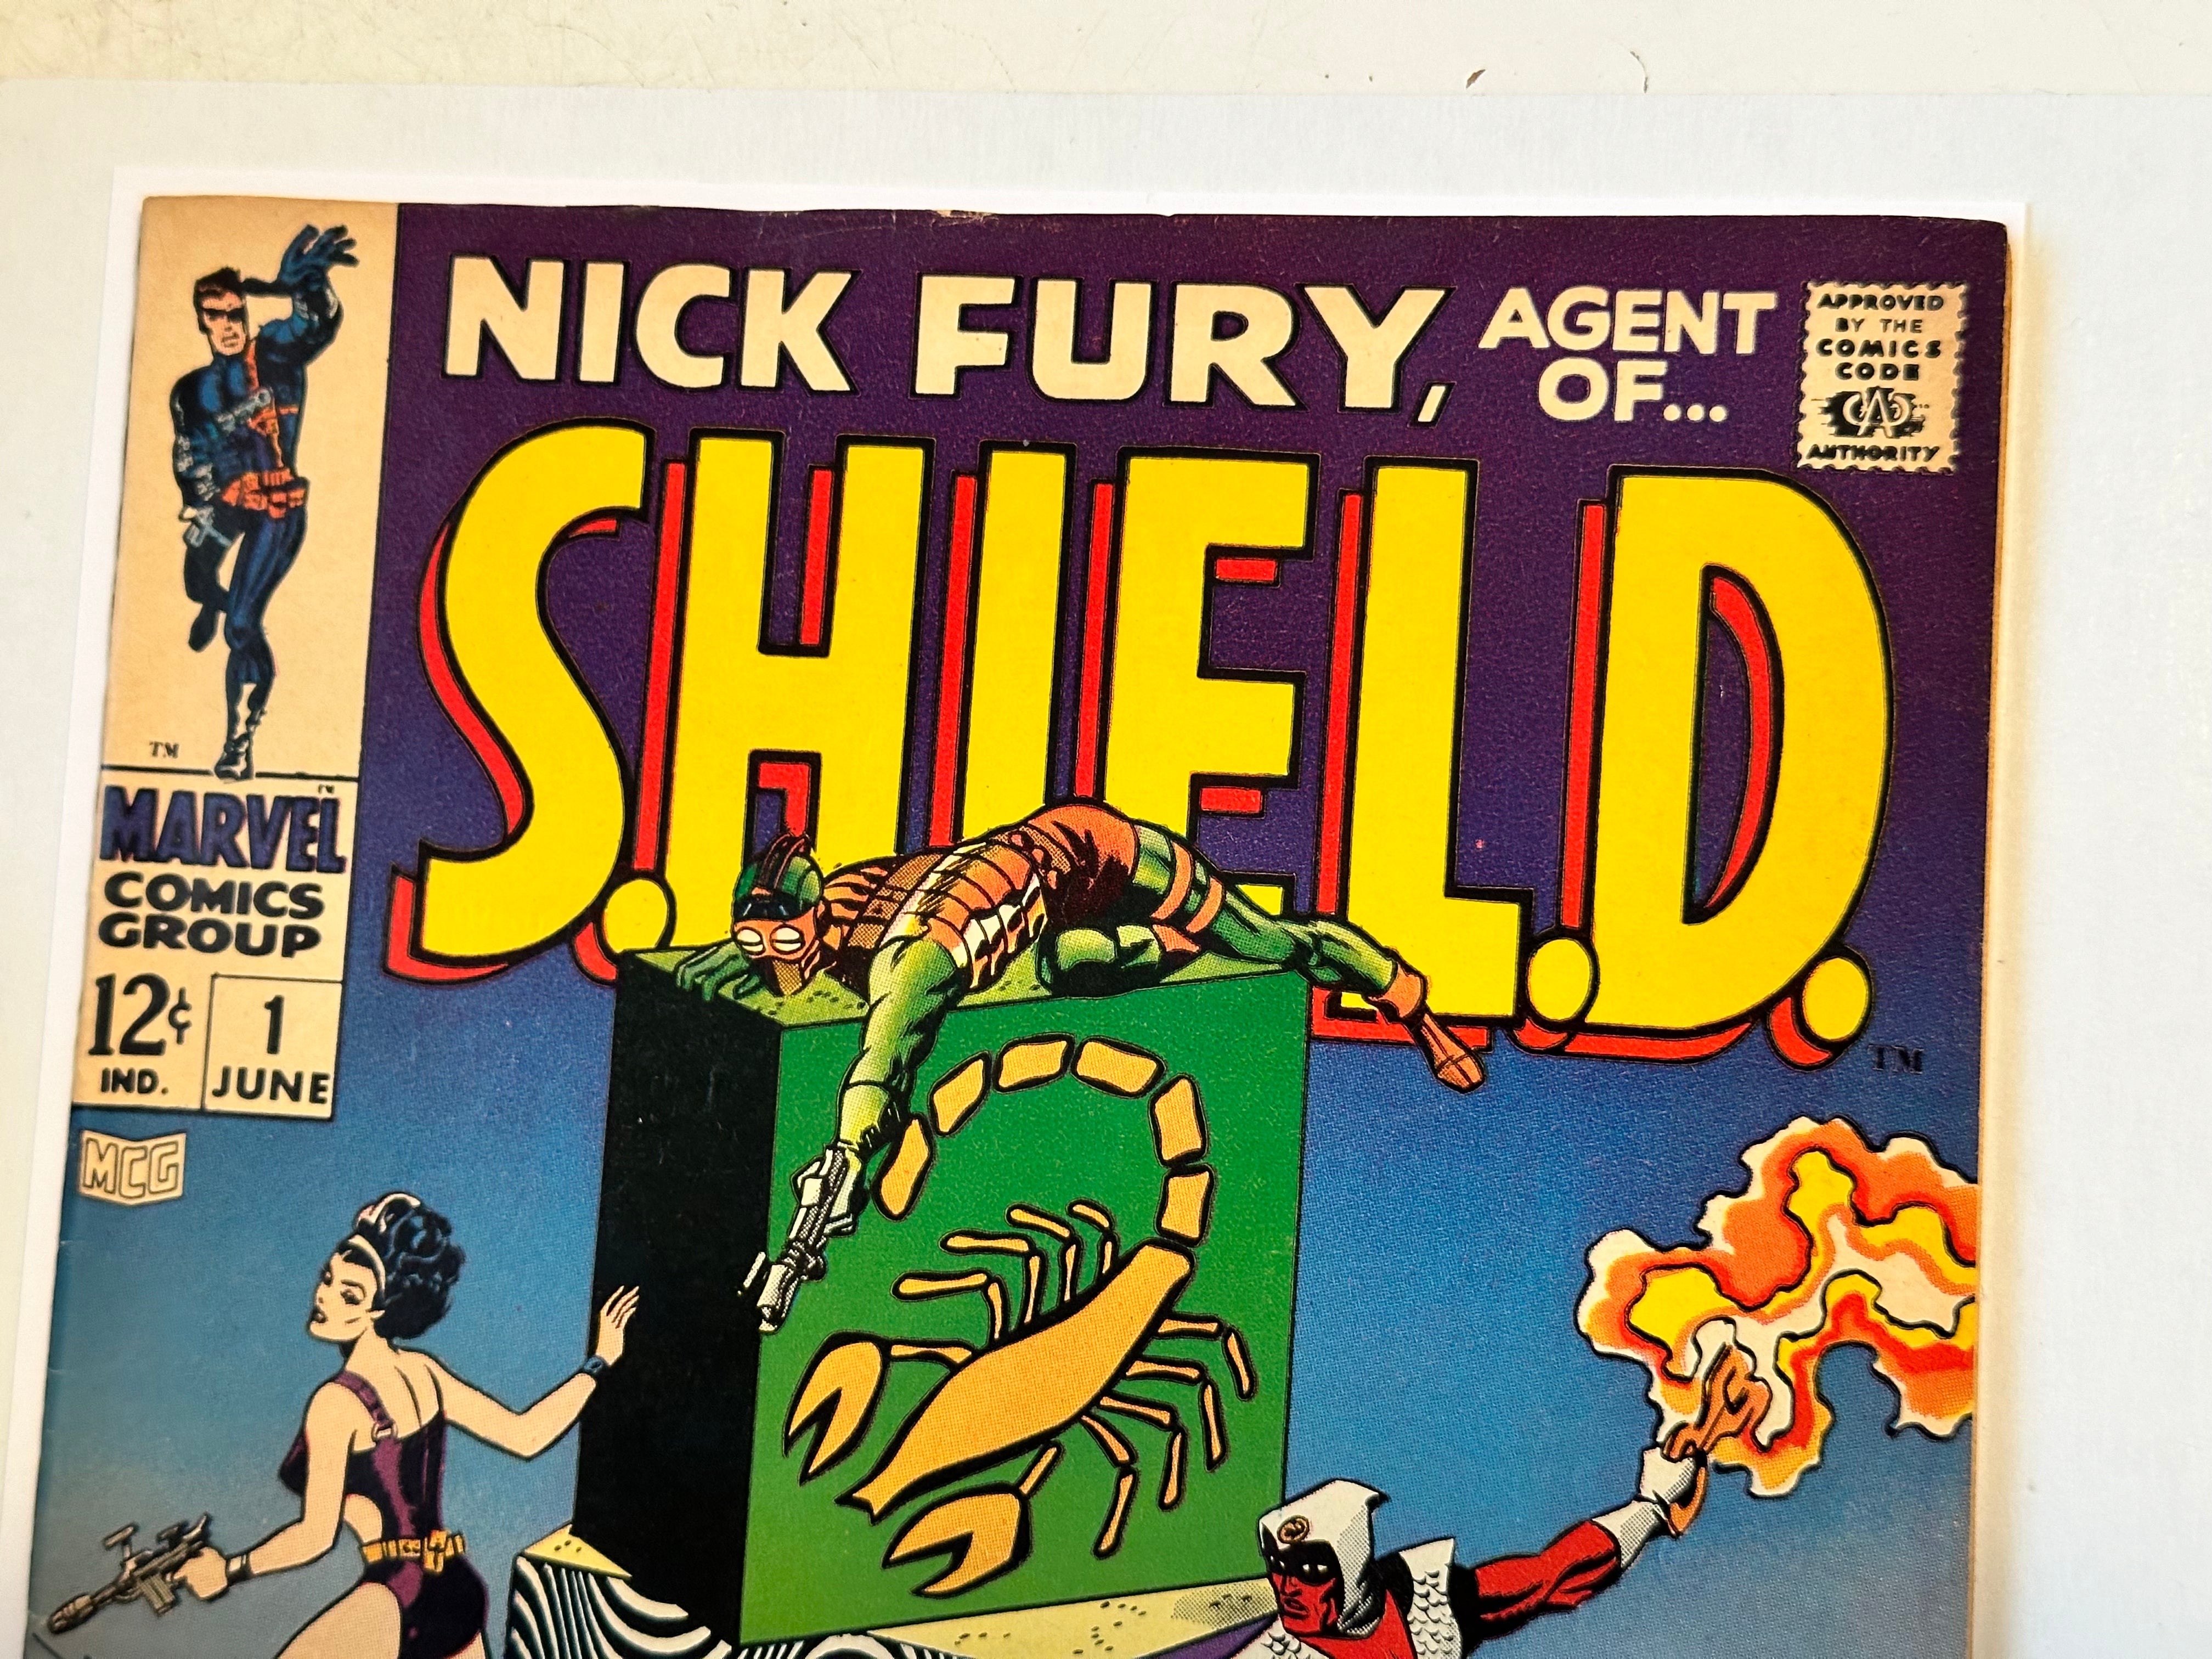 Nick fury, agent of shield, rare number one first issue, high-grade comic book 1968